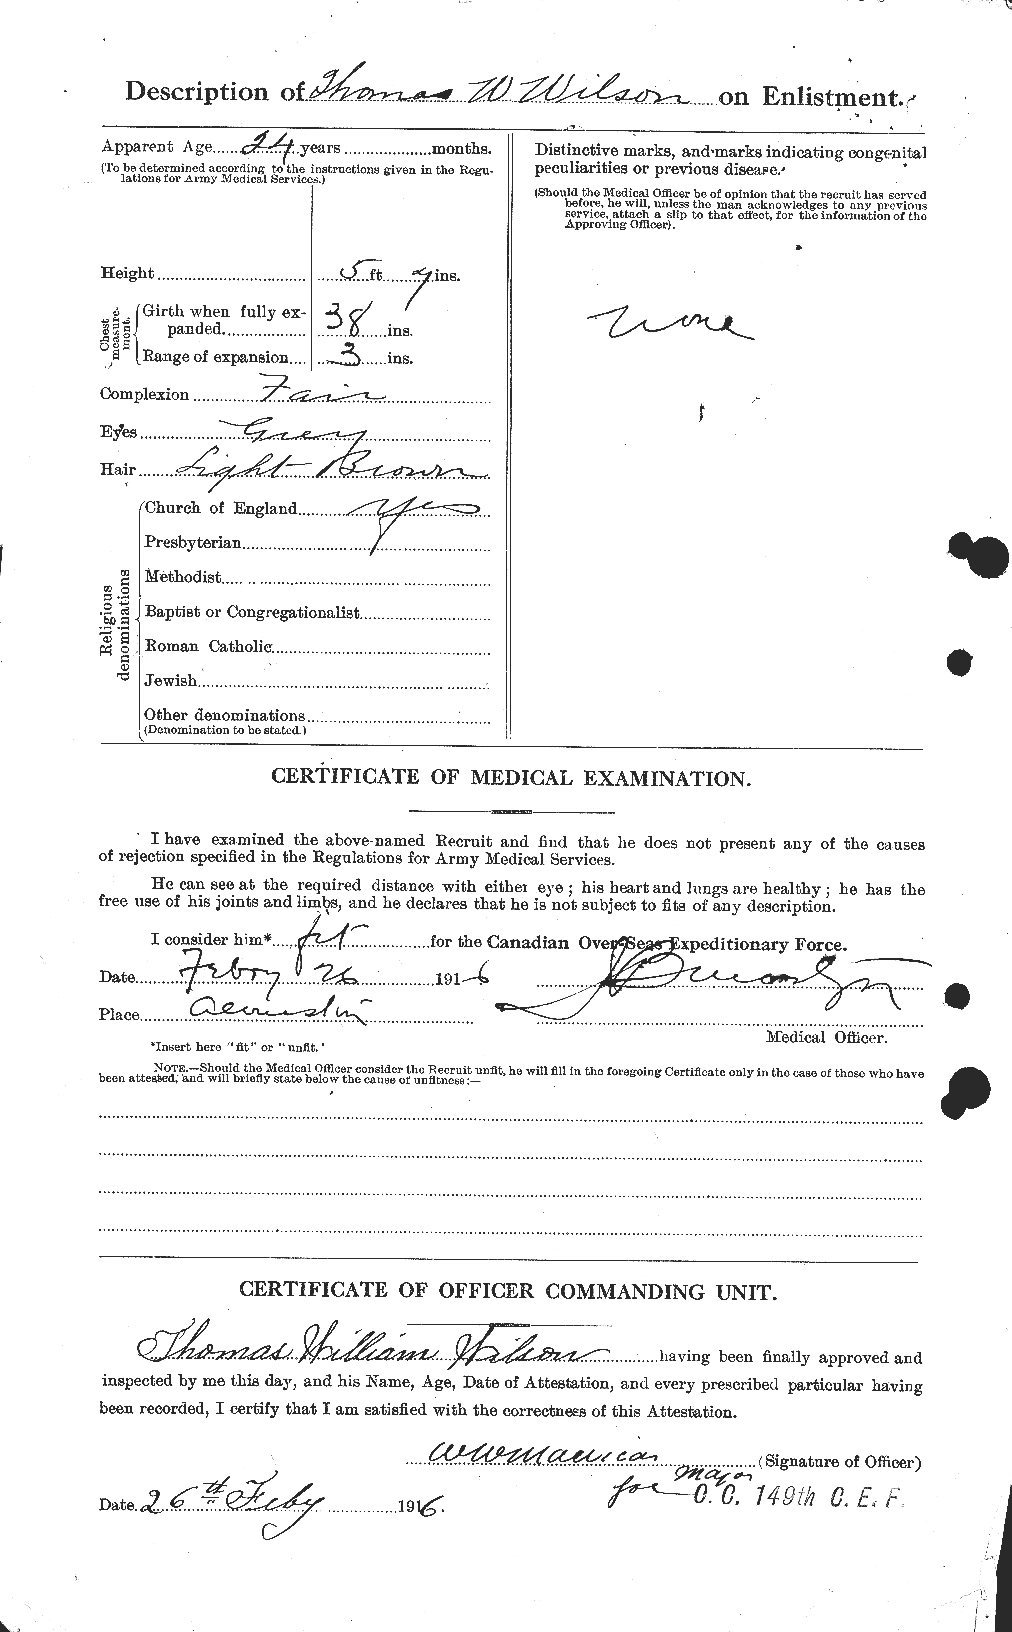 Personnel Records of the First World War - CEF 681697b